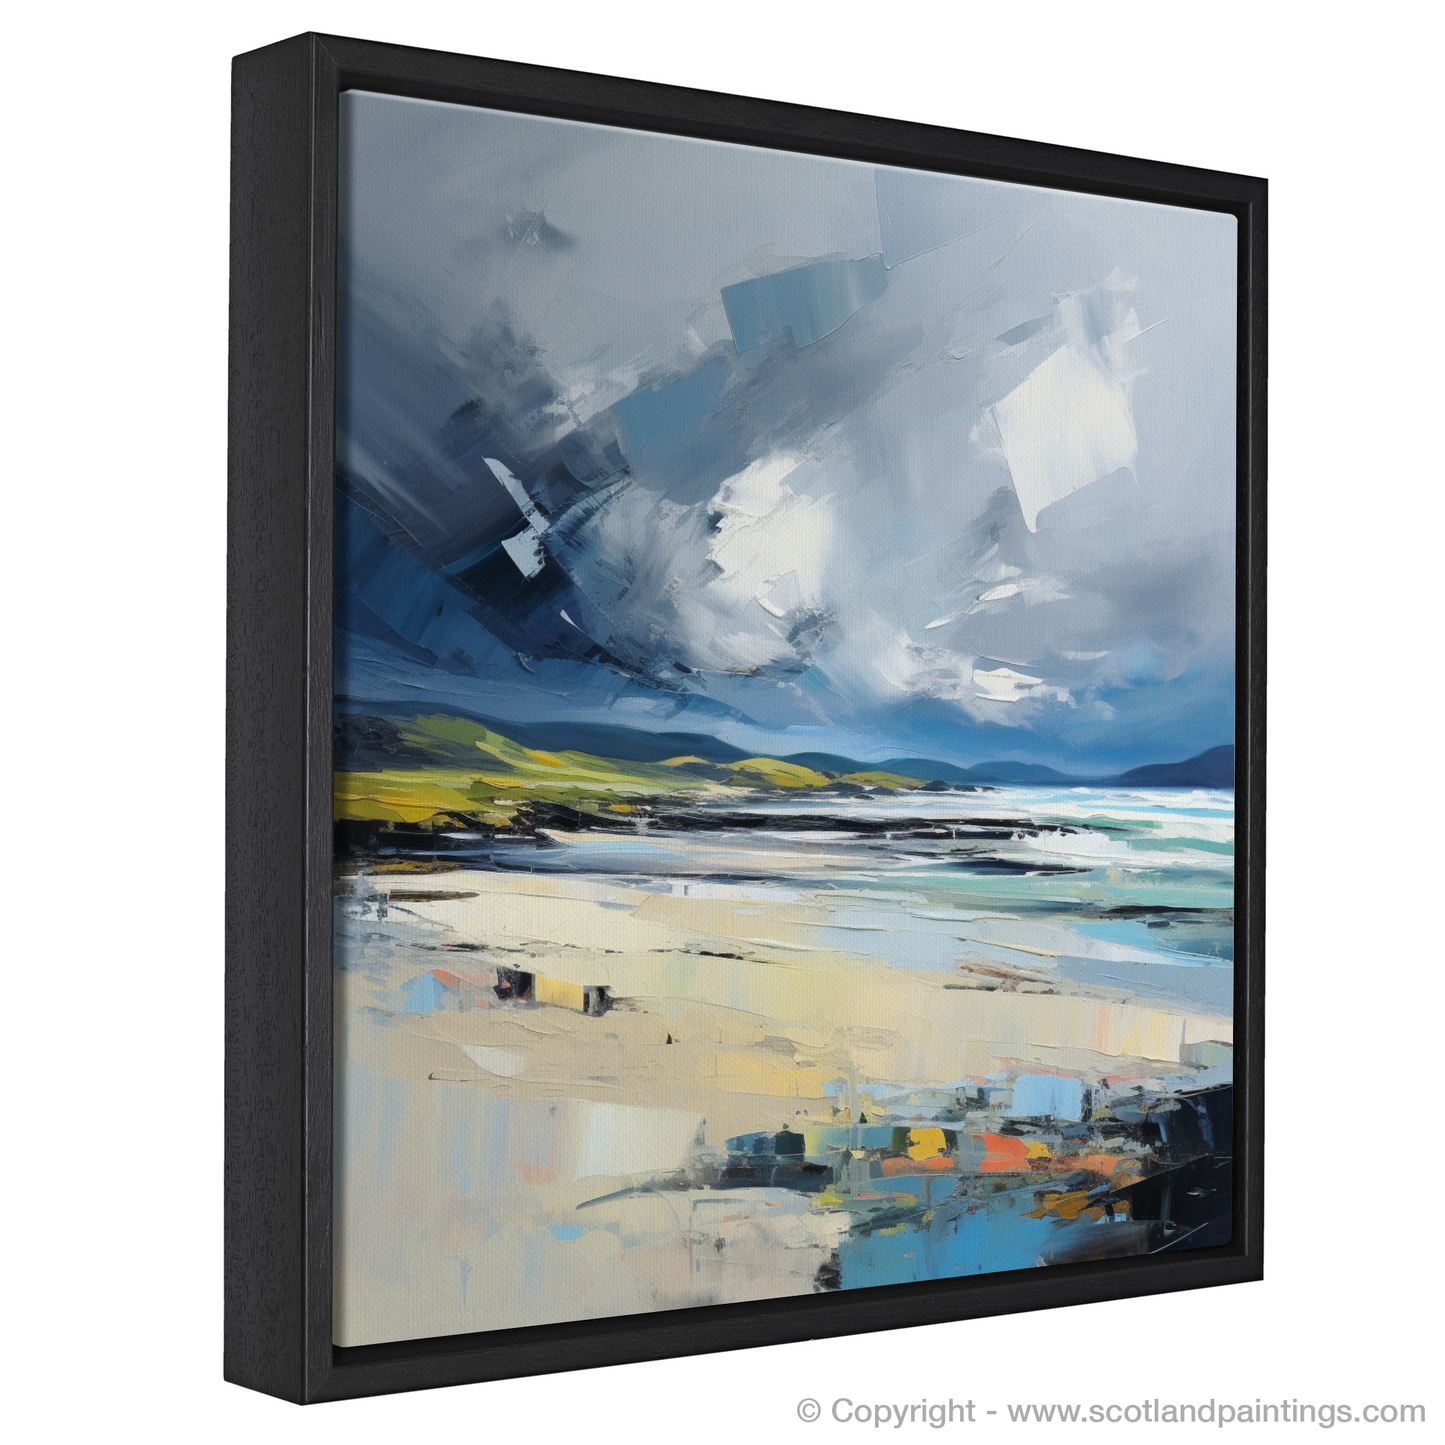 Painting and Art Print of Scarista Beach with a stormy sky entitled "Stormy Elegance of Scarista Beach".